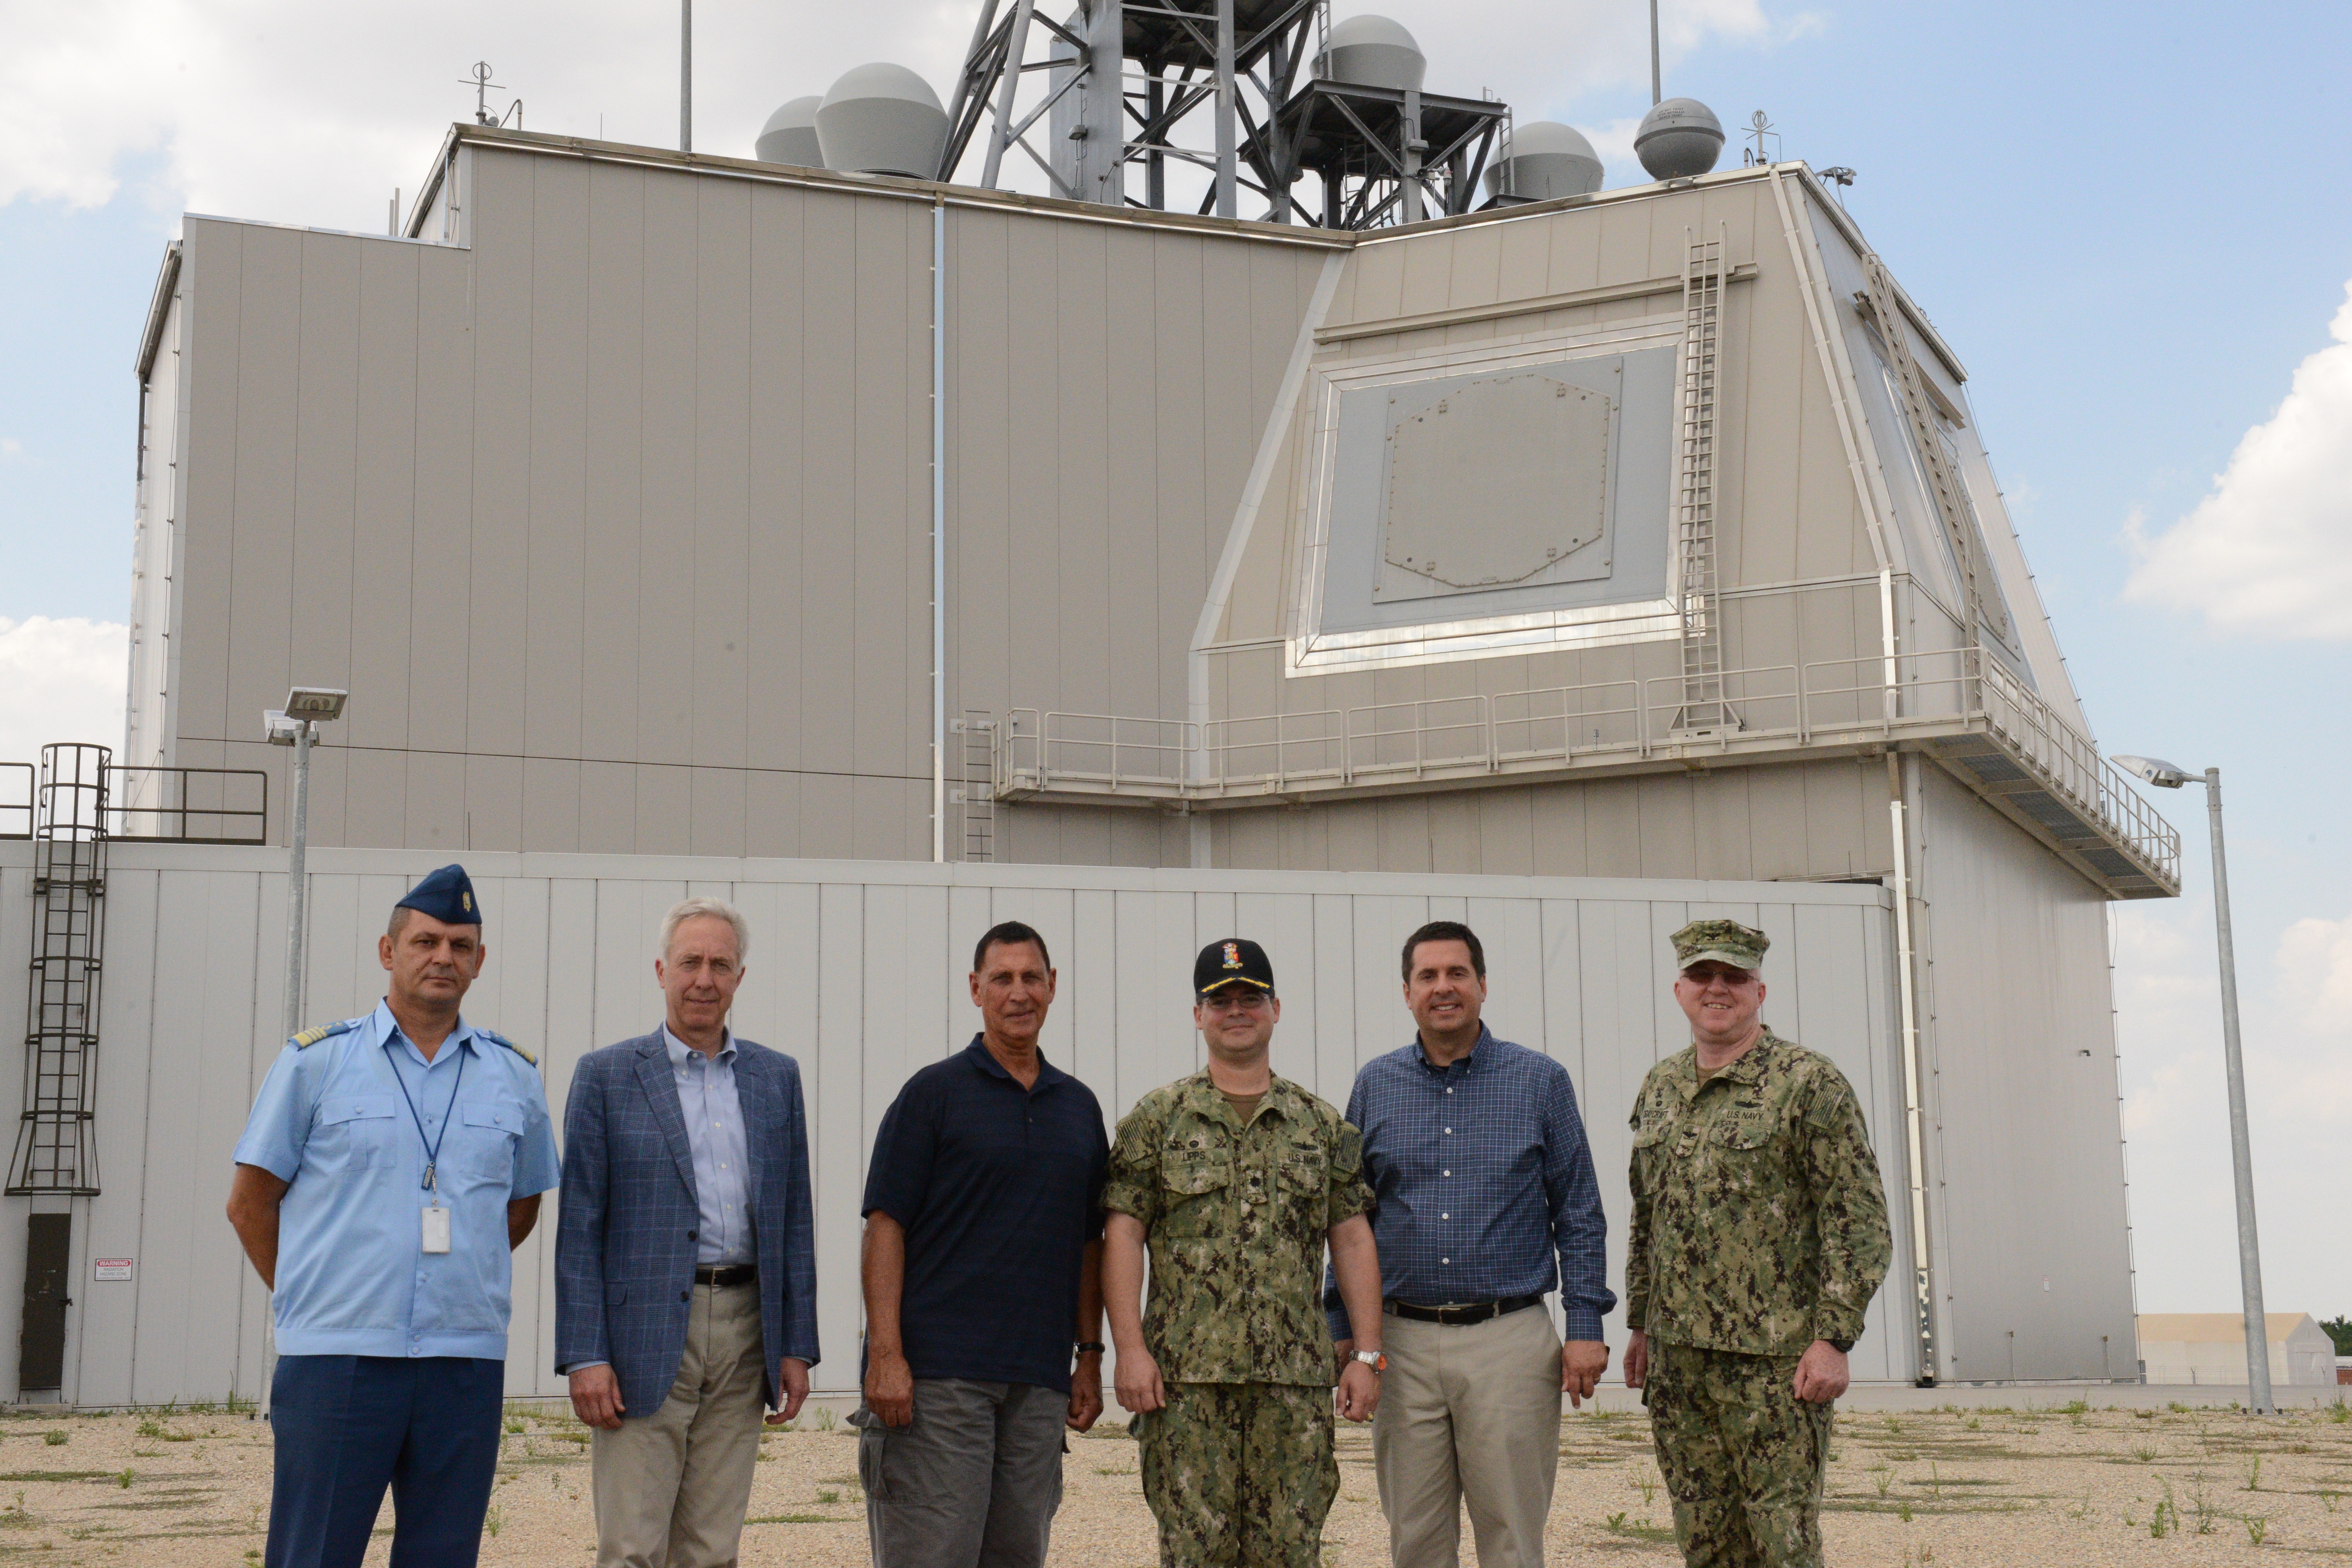 DEVESELU, Romania (Aug. 6, 20-16) Members of the House Permanent Select Committee on Intelligence, stop to take a photo in front of the Aegis Ashore Missile Defense System (AAMDS) deckhouse during their recent visit to Naval Support Facility (NSF) Deveselu and AAMDS Romania. (U.S. Navy Photo by Lt. Travis Christensen/Released)